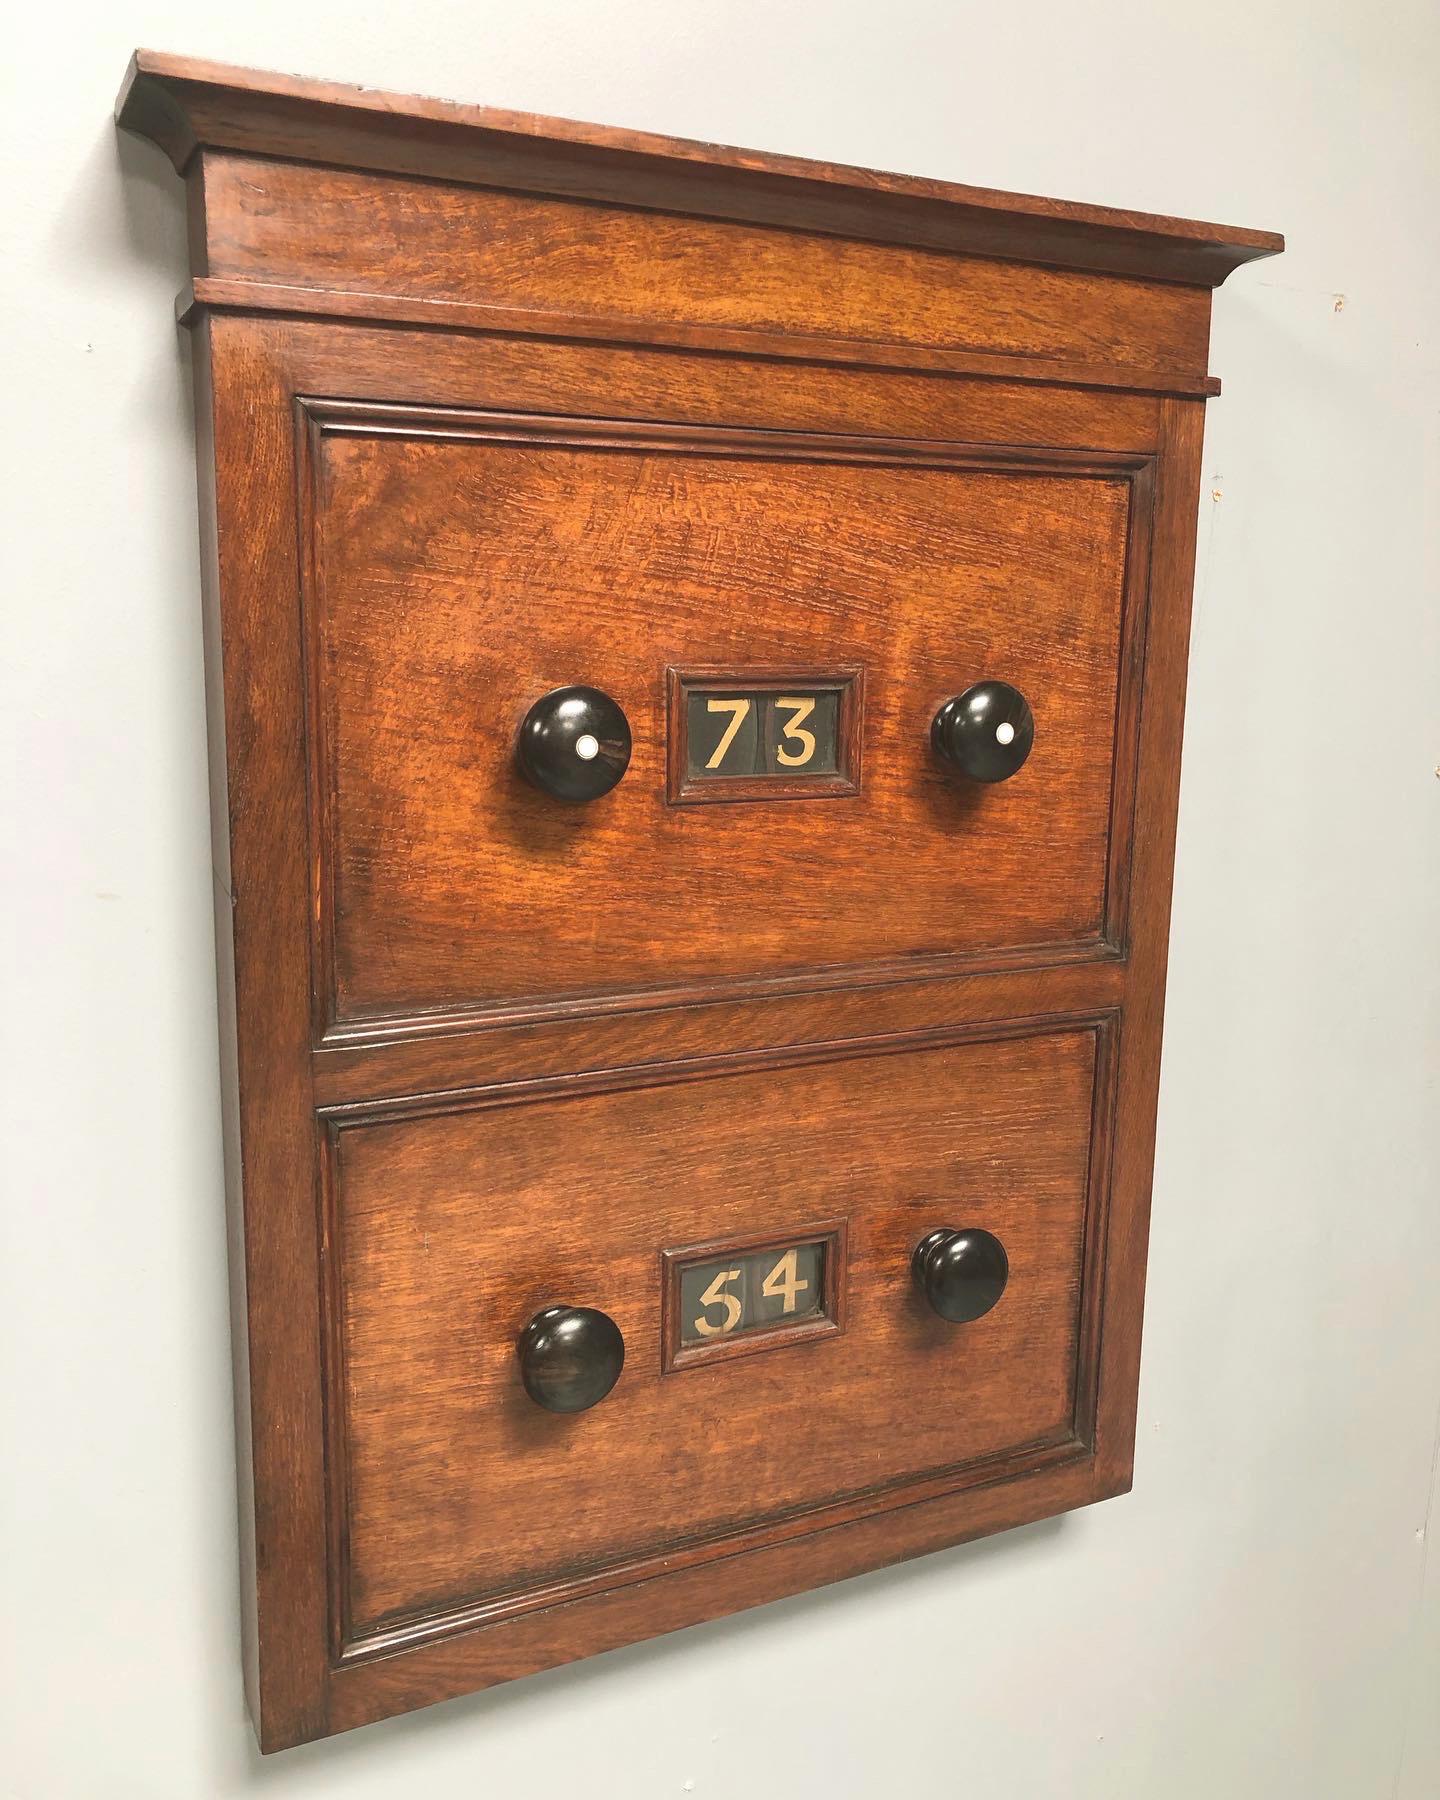 Clock Face Numerical Billiards Scorer Oak Cabinet with Rotating Dials For Sale 1